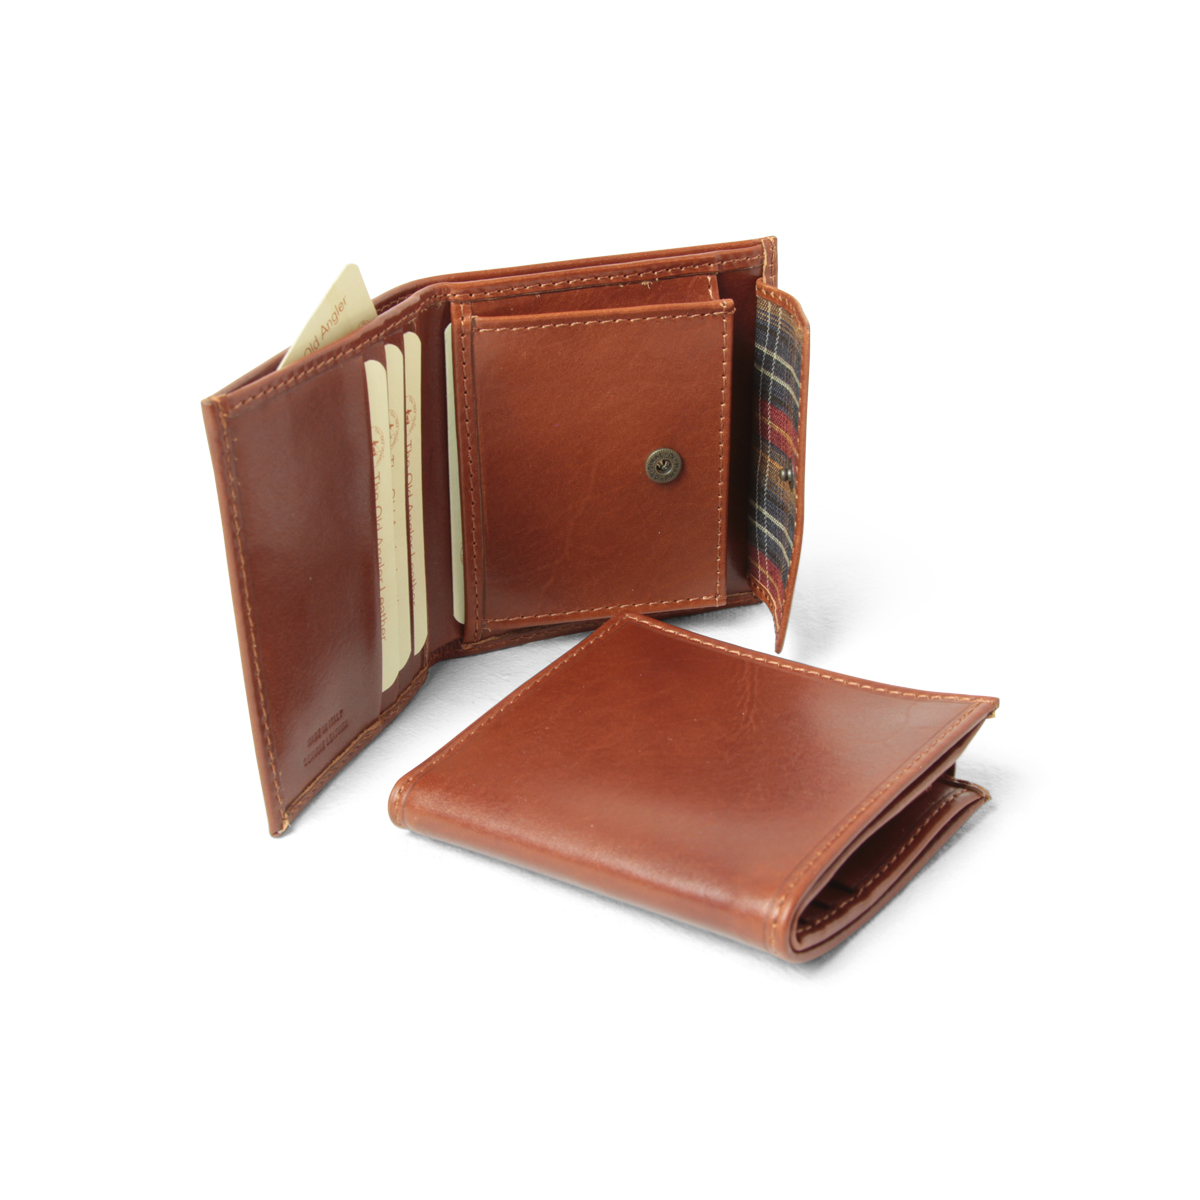 Leather wallet - brown |803893MA|Old Angler Firenze